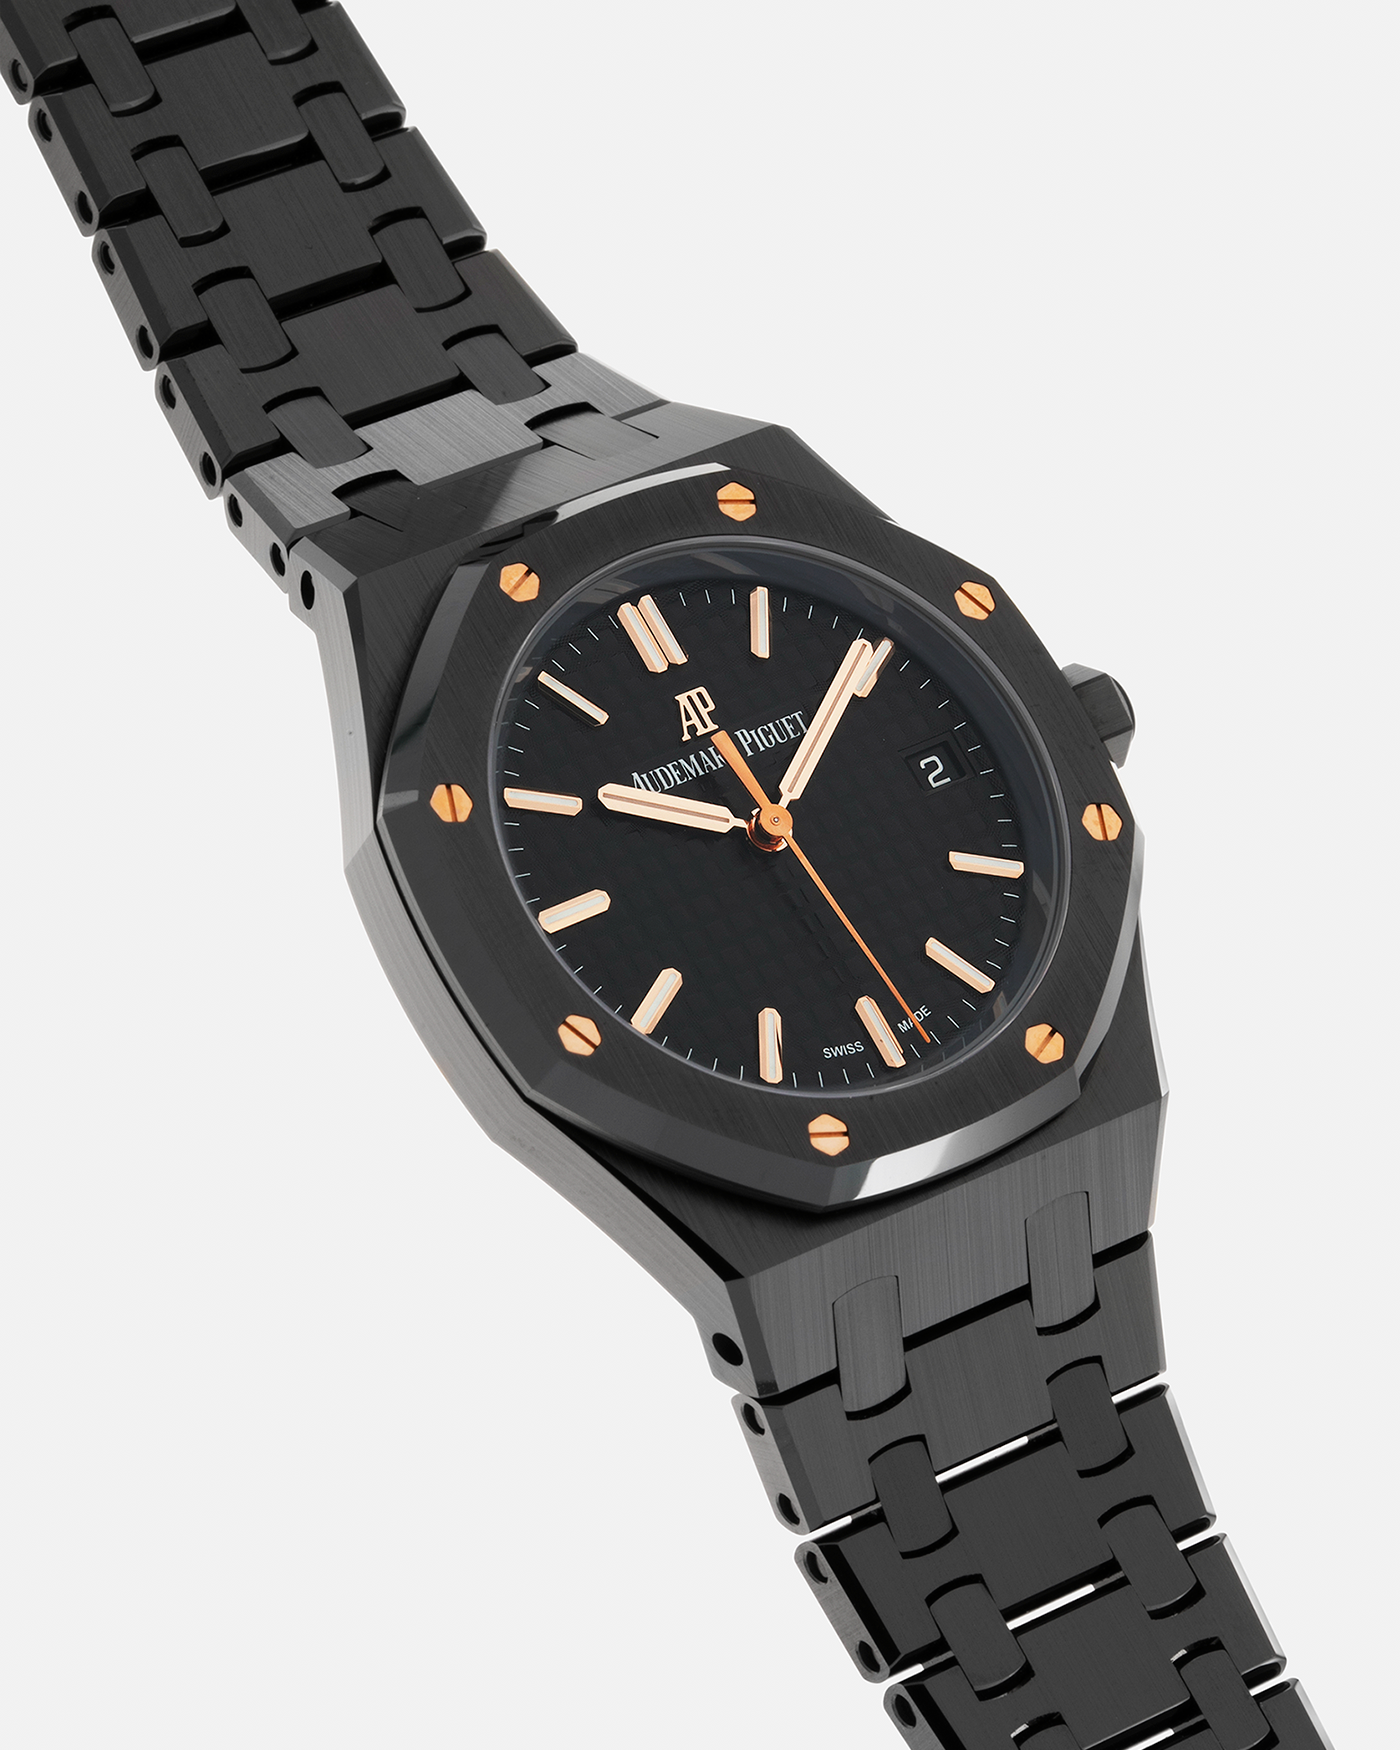 Brand: Audemars Piguet Year: 2021 Model: Royal Oak Reference Number: 77350CE Material: Ceramic Case and Bracelet, Titanium Clasp and Caseback Movement: Vaucher-based Cal. 5800, Self-Winding Case Dimensions: 34mm x 8.8mm Bracelet: Audemars Piguet Integrated Black Ceramic Bracelet with Signed Titanium Clasp